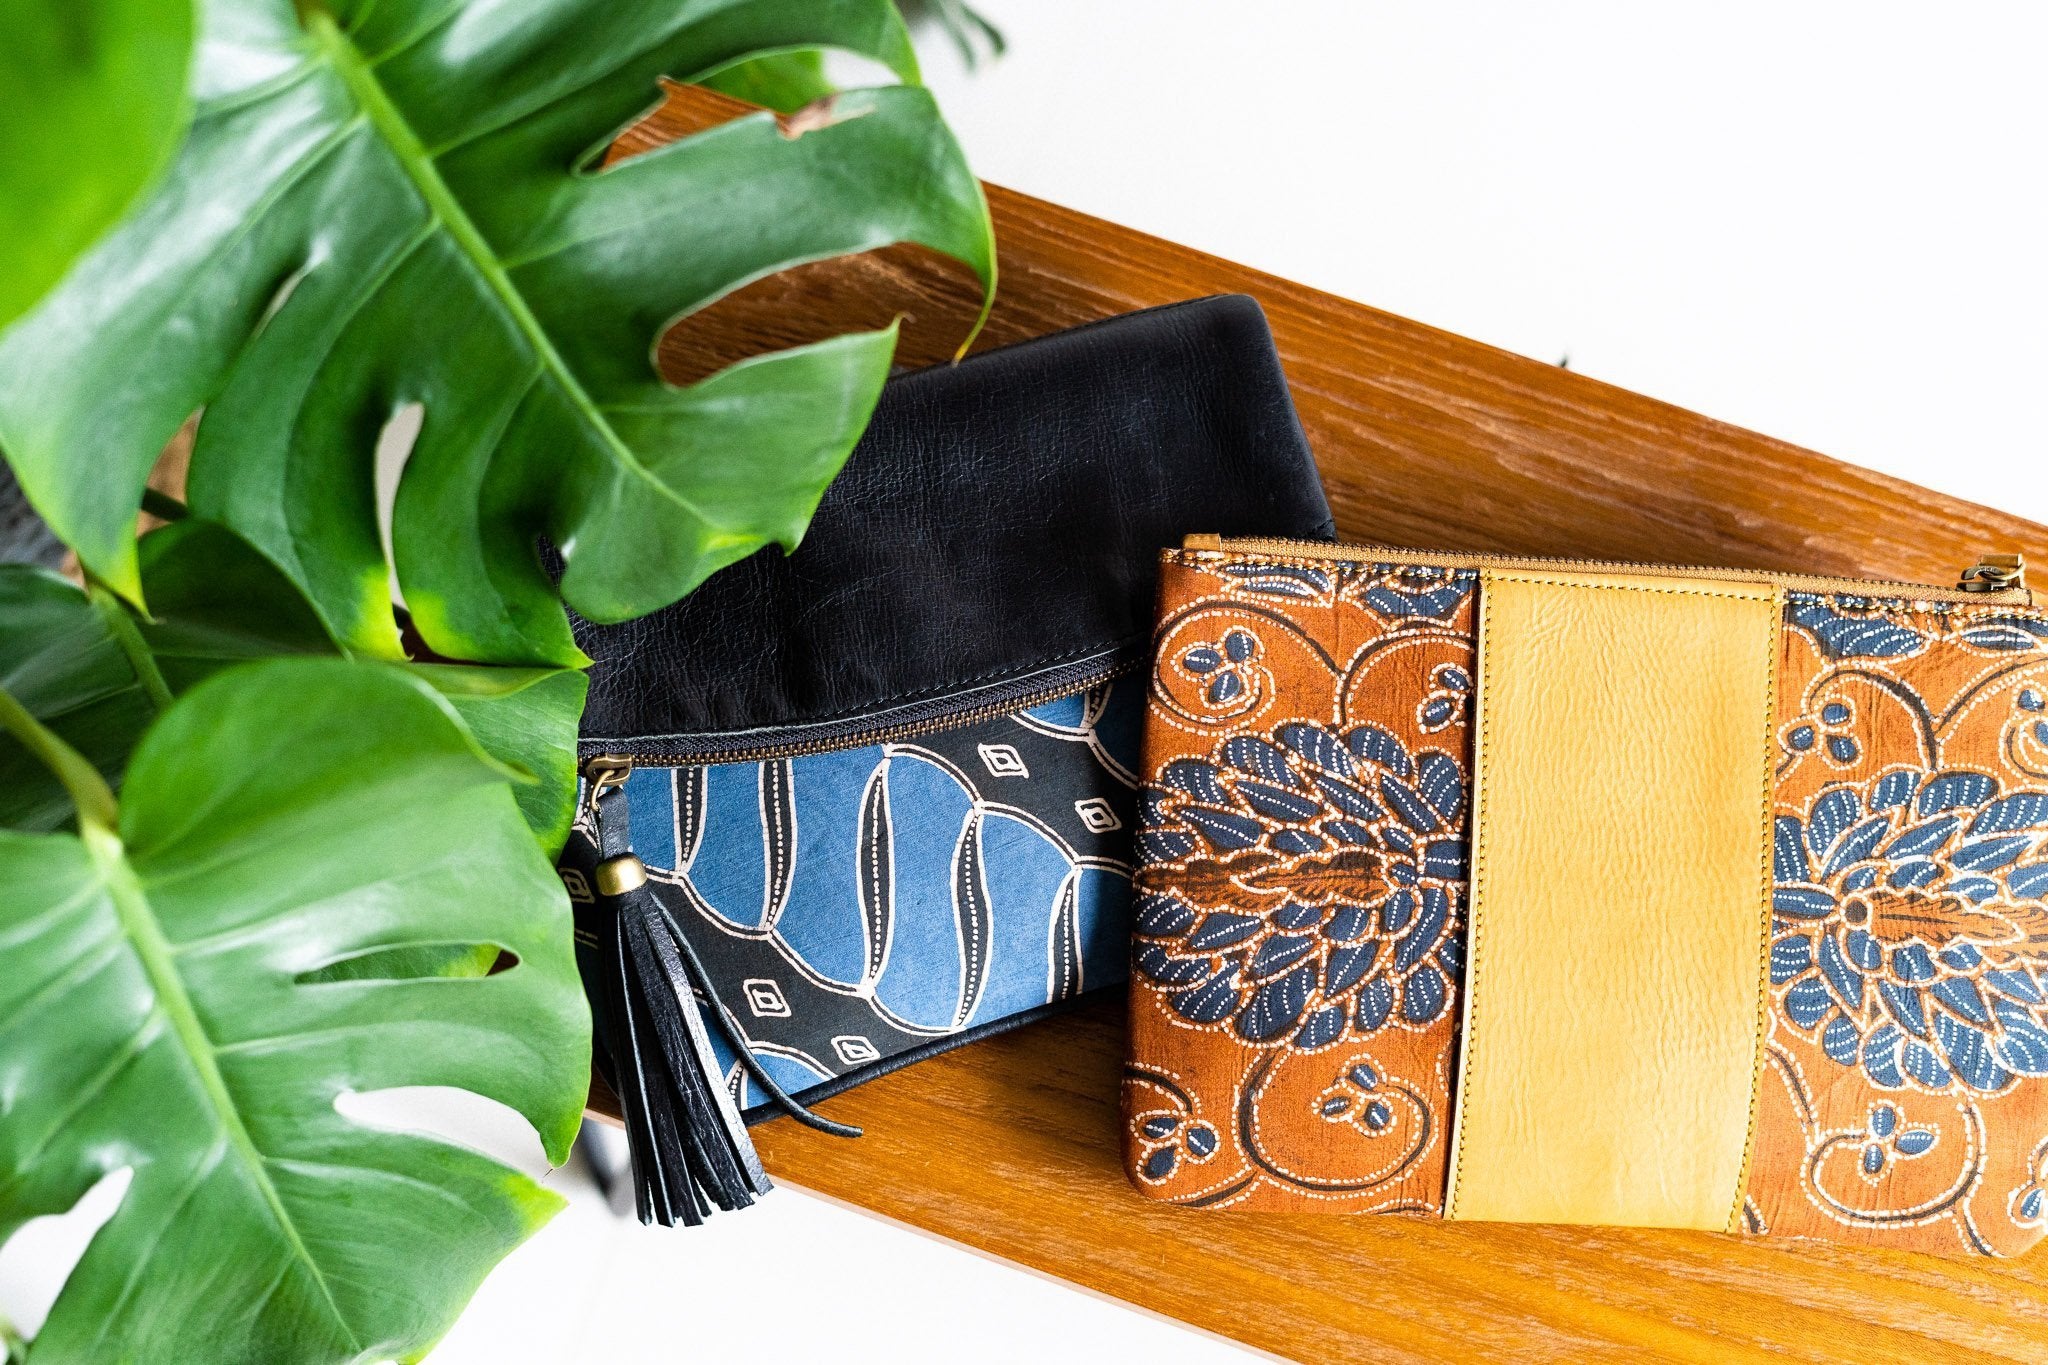 Batik and handwoven textiles and fashion accessories from Singapore ethical designer Gypsied